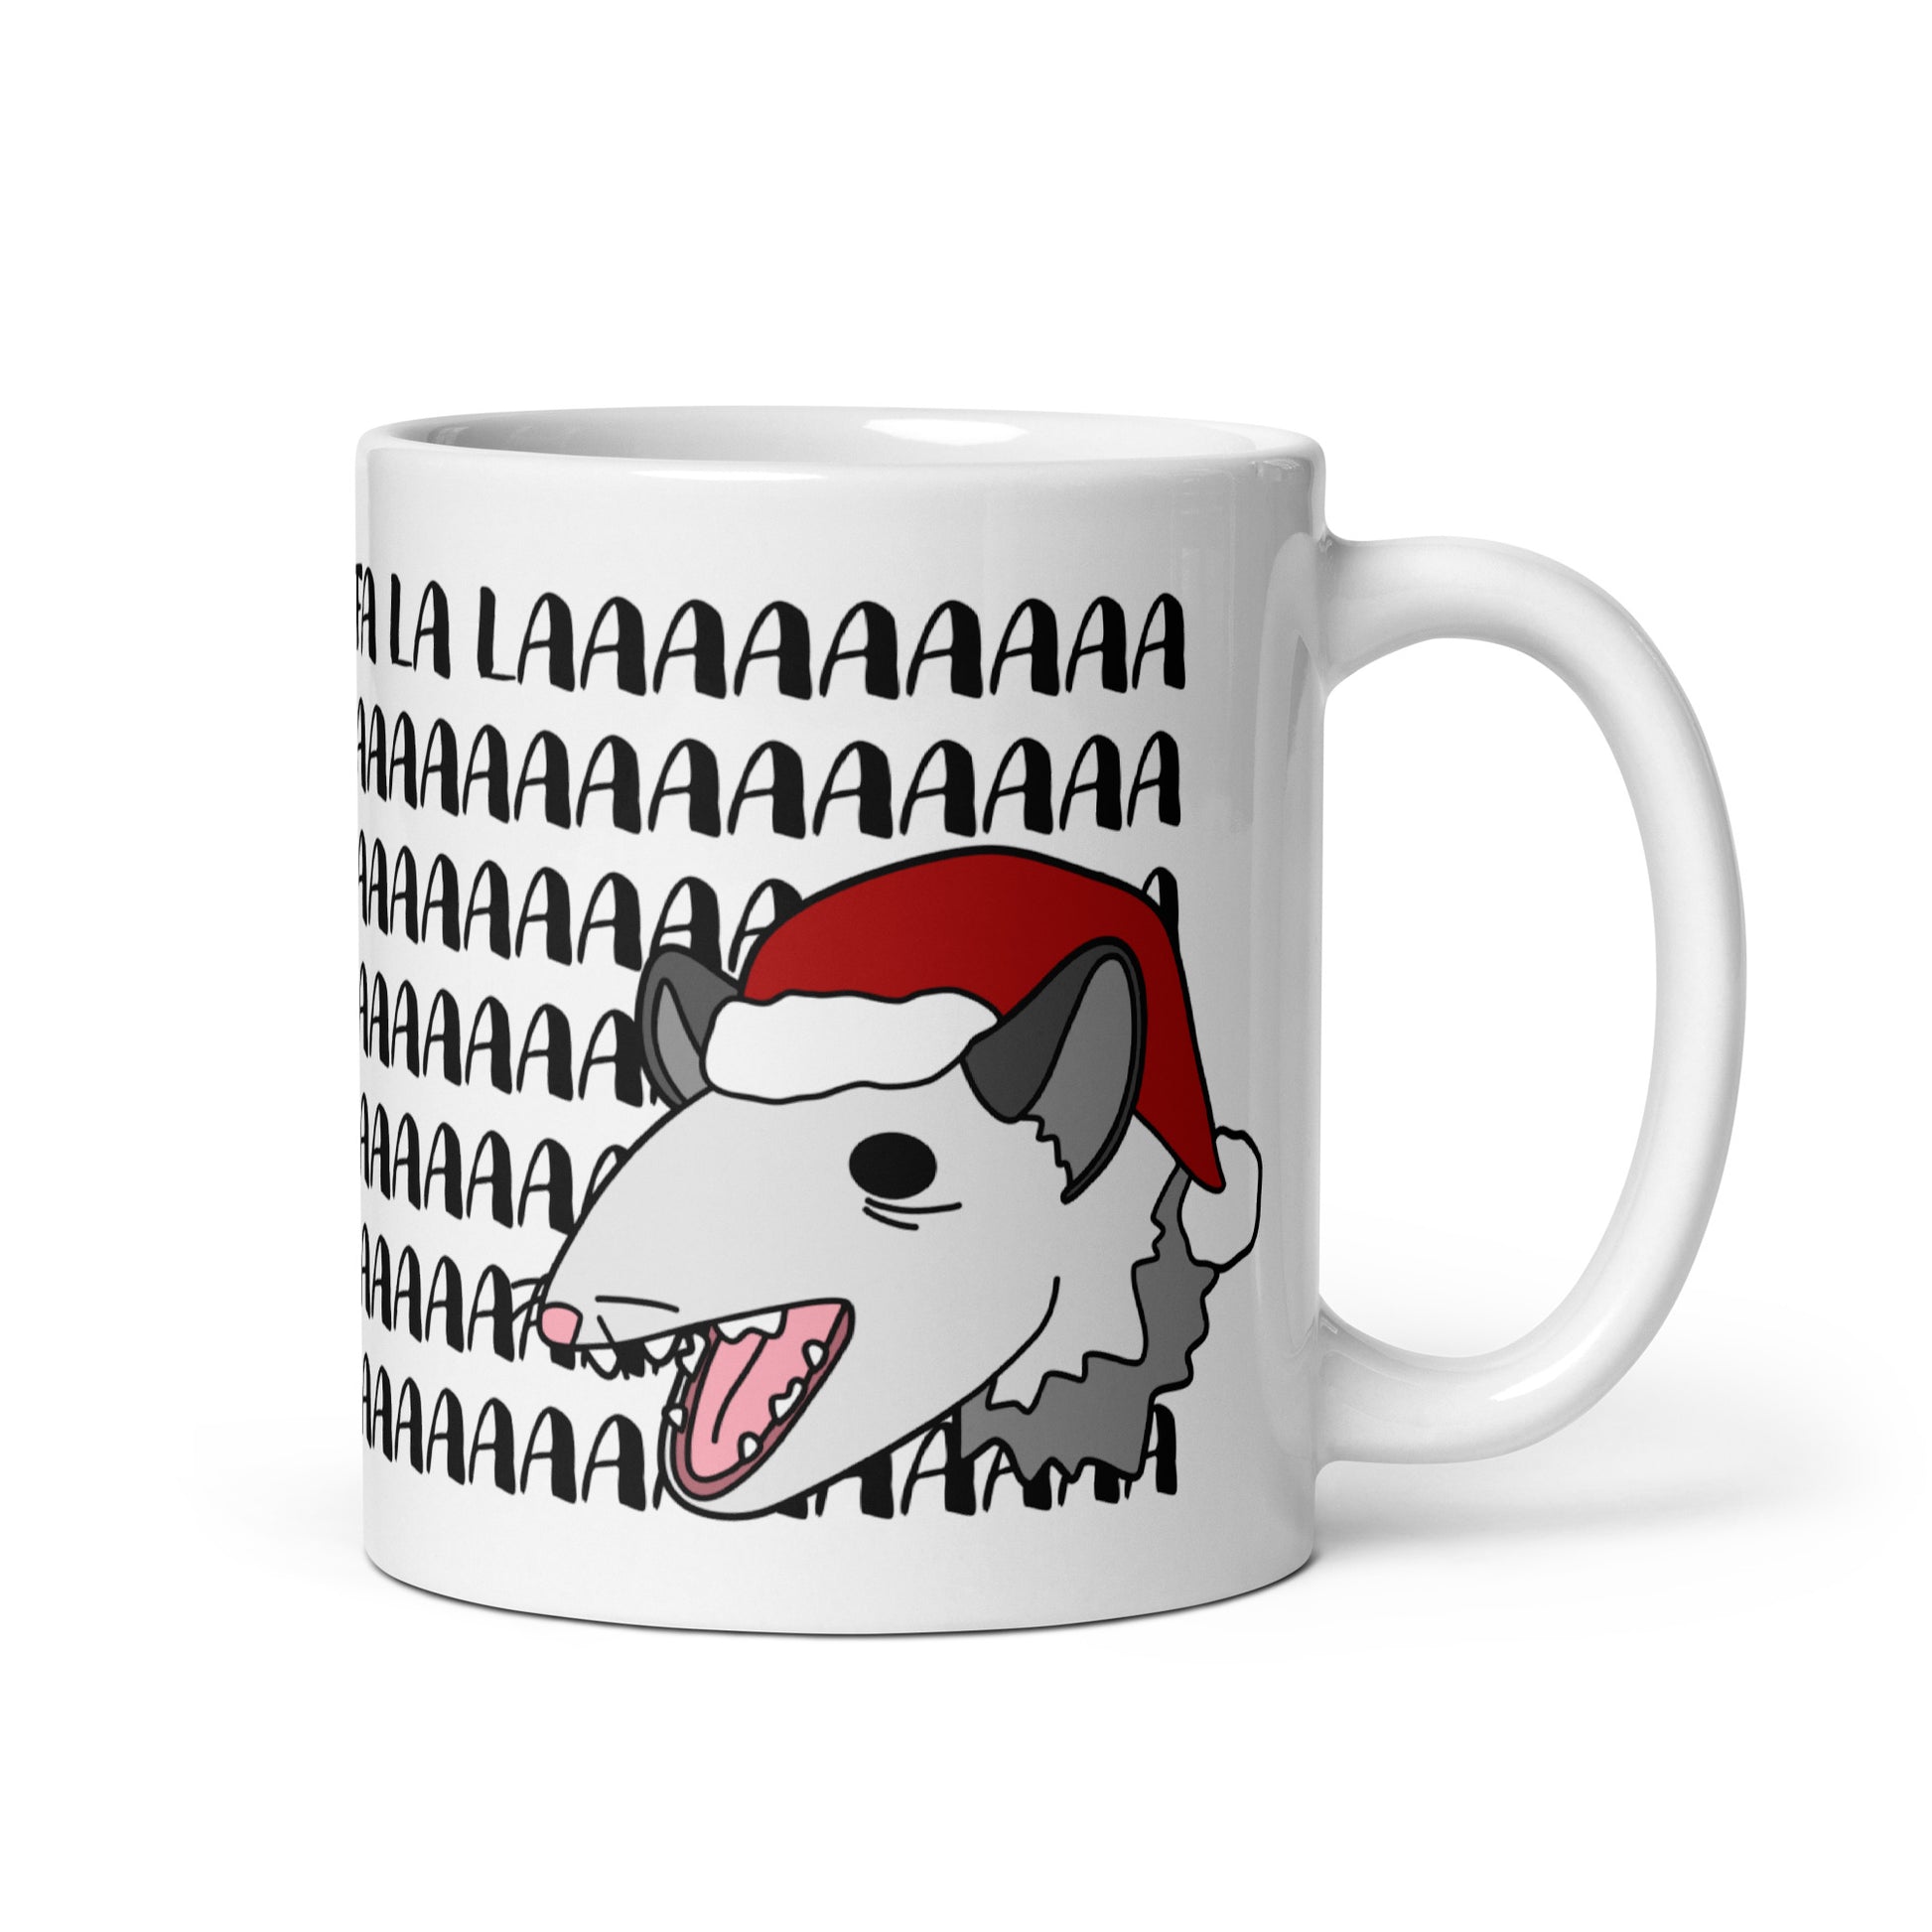 A white 11 ounce mug featuring an illustration of a possum wearing a Santa hat. The possum appears to be screaming, and text behind his head reads "FA LA LAAAAAA"